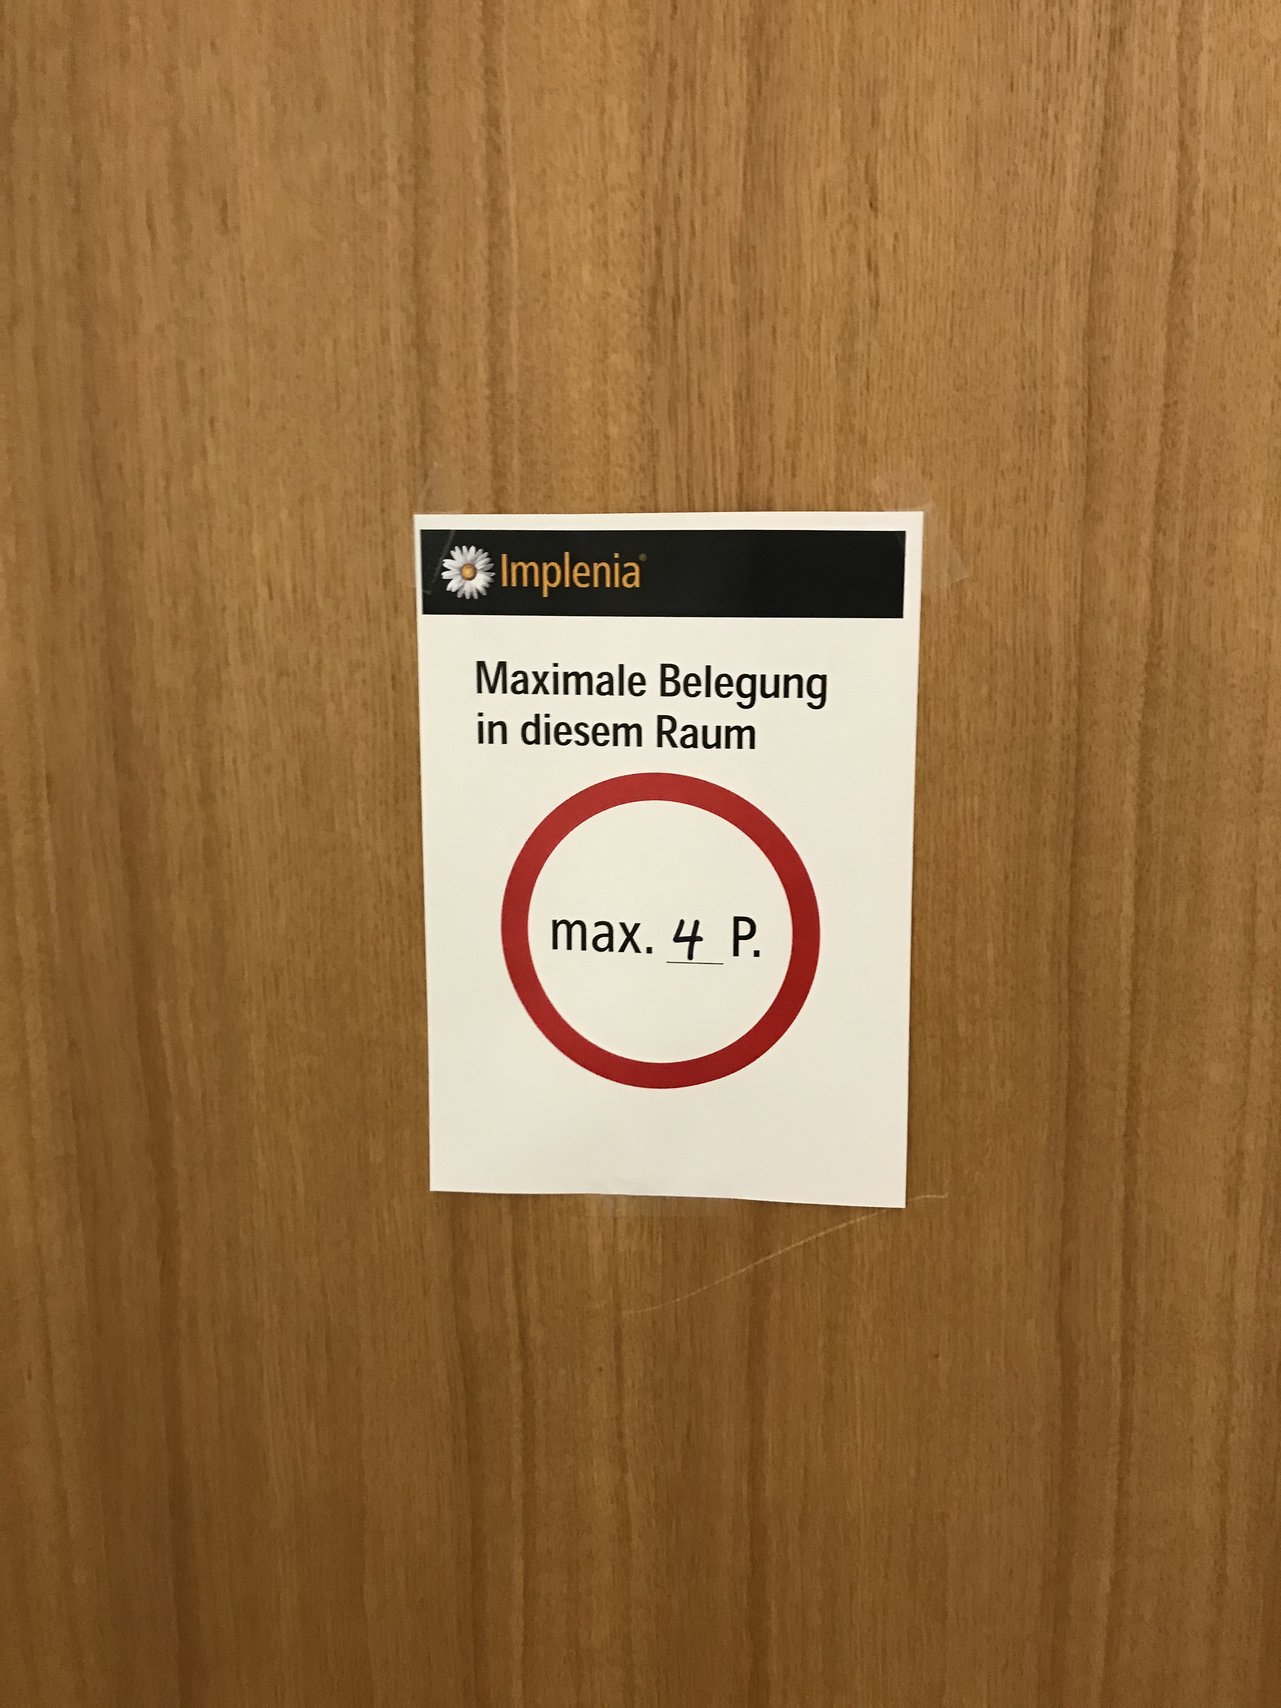 Meeting rooms: At the doors of the meeting rooms the maximum number of people allowed is indicated.